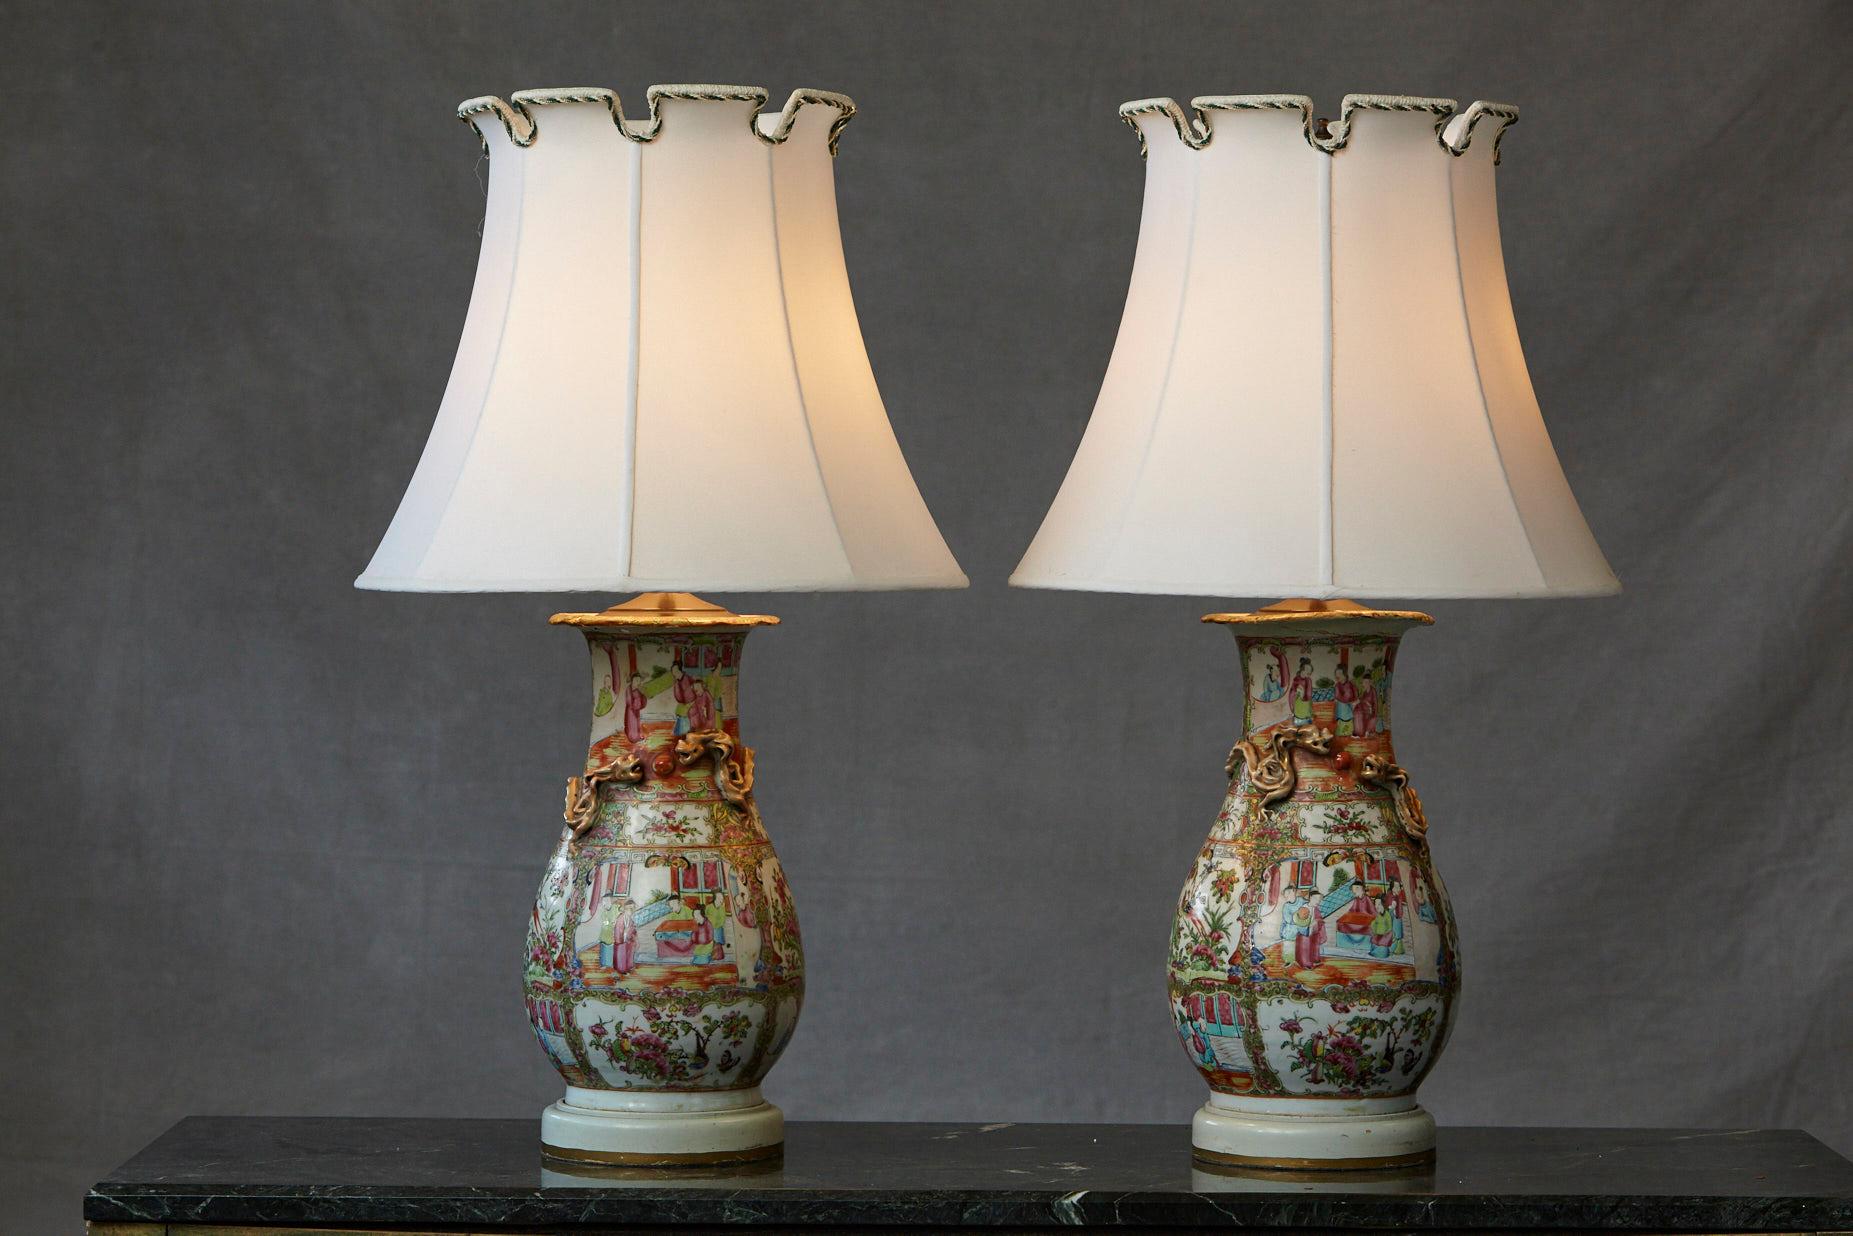 vase style lamps